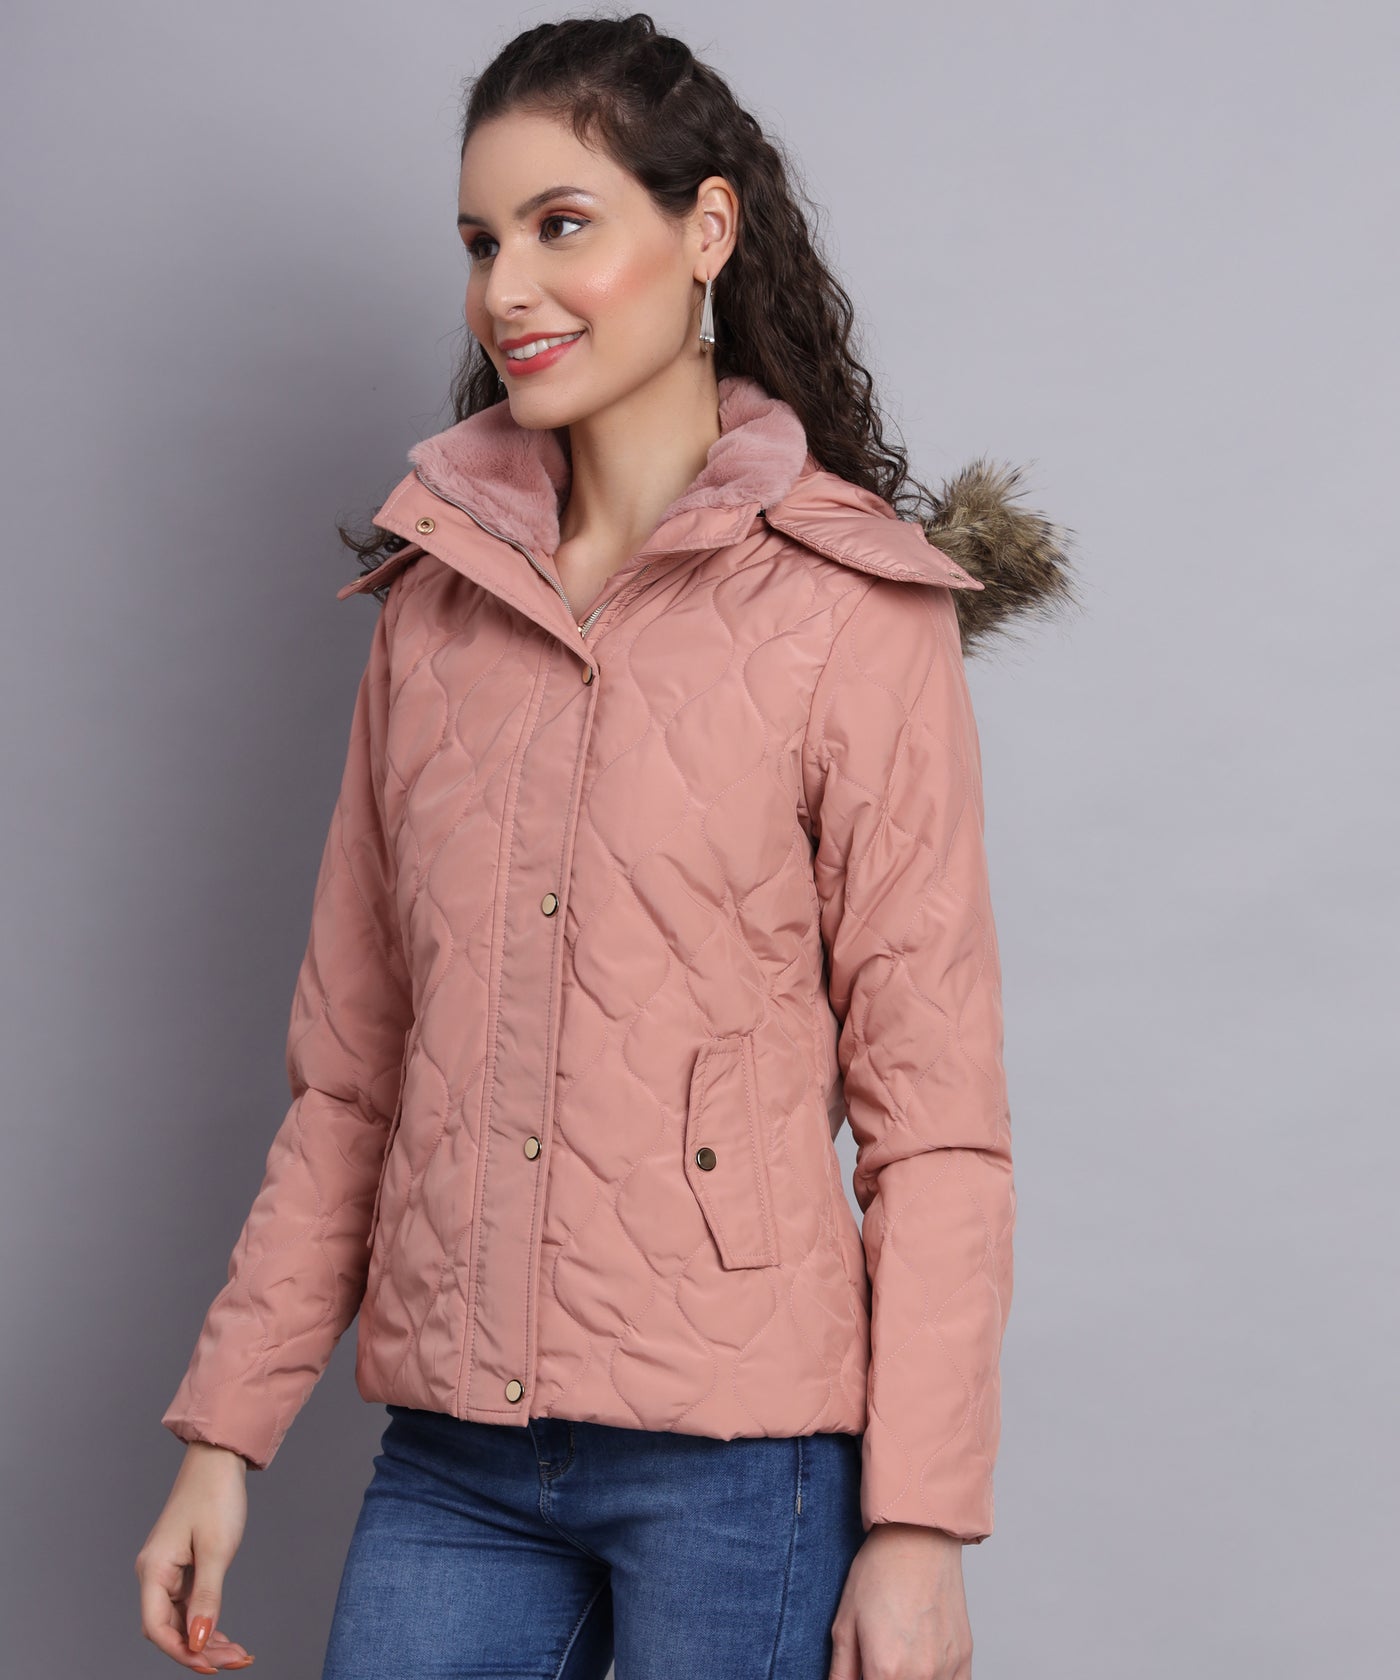 Pink diamond quilted jacket -AW6130